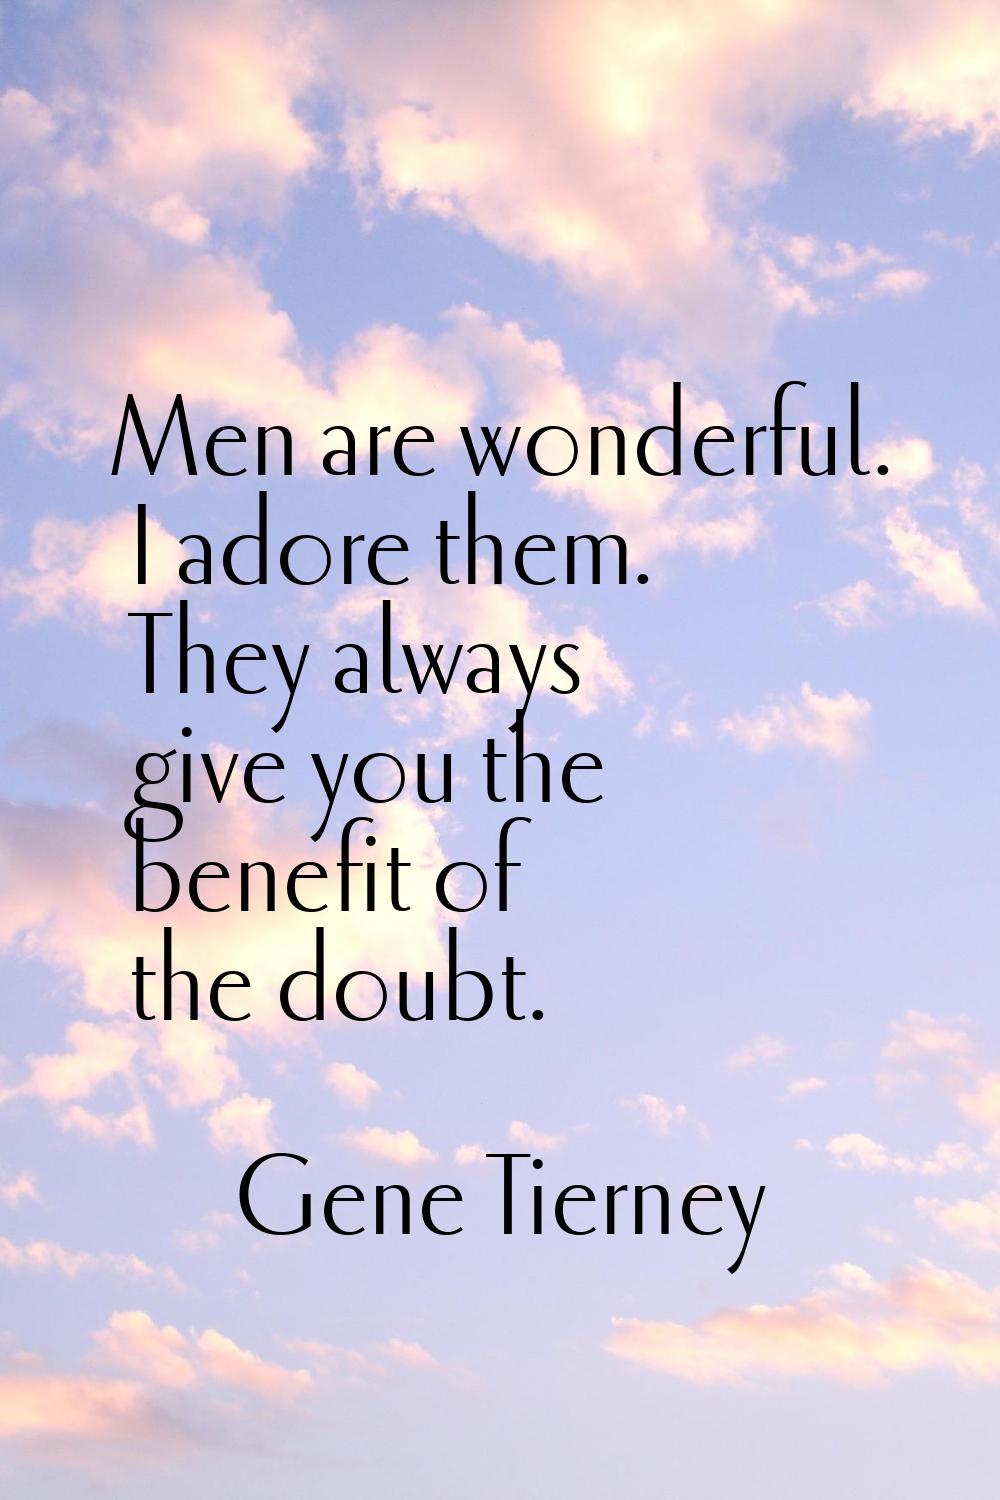 Men are wonderful. I adore them. They always give you the benefit of the doubt.